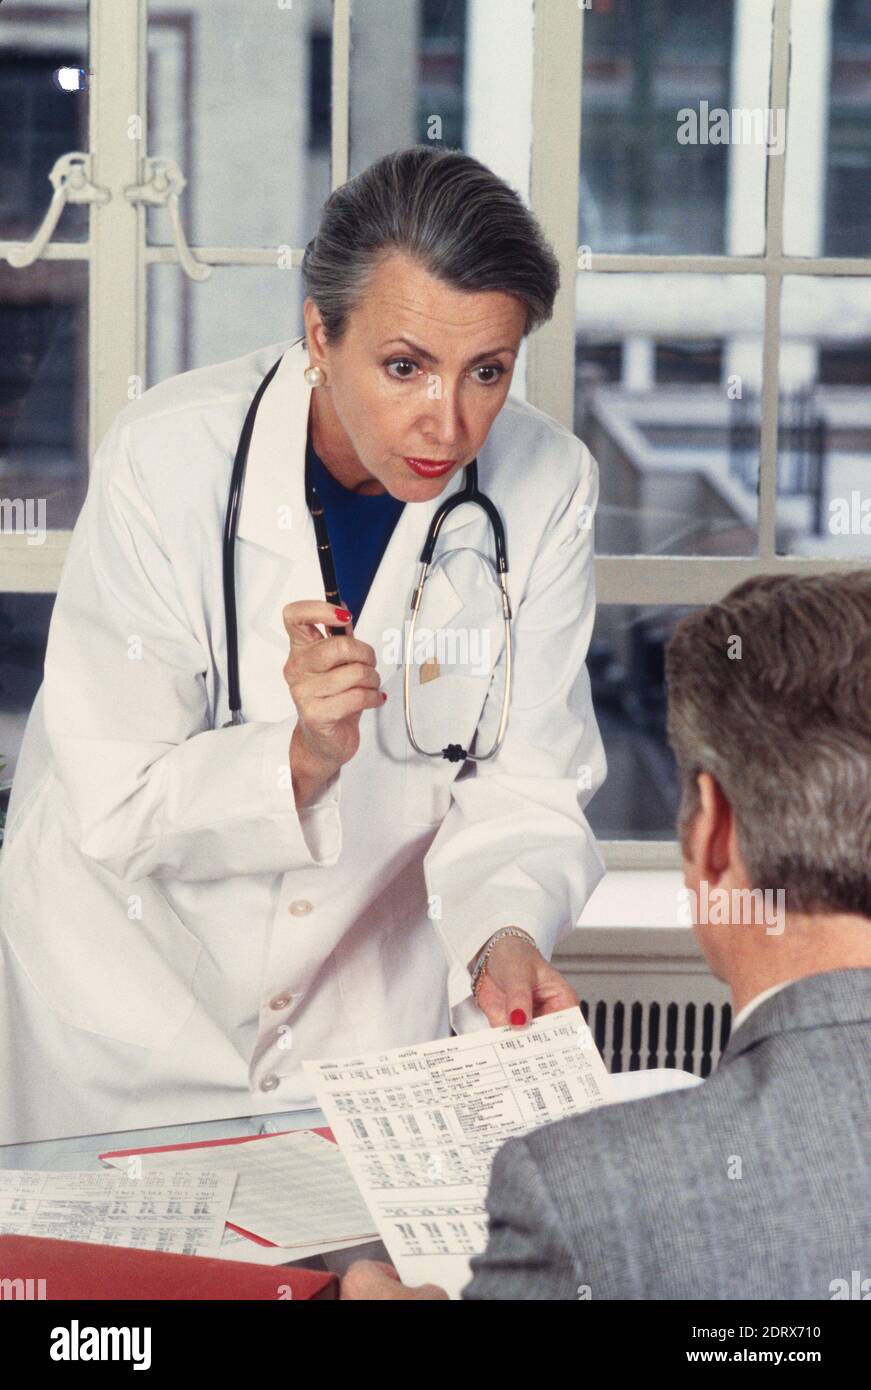 1994, Female Doctor Reviews Lab Results with a Male Patient., USA Stock Photo